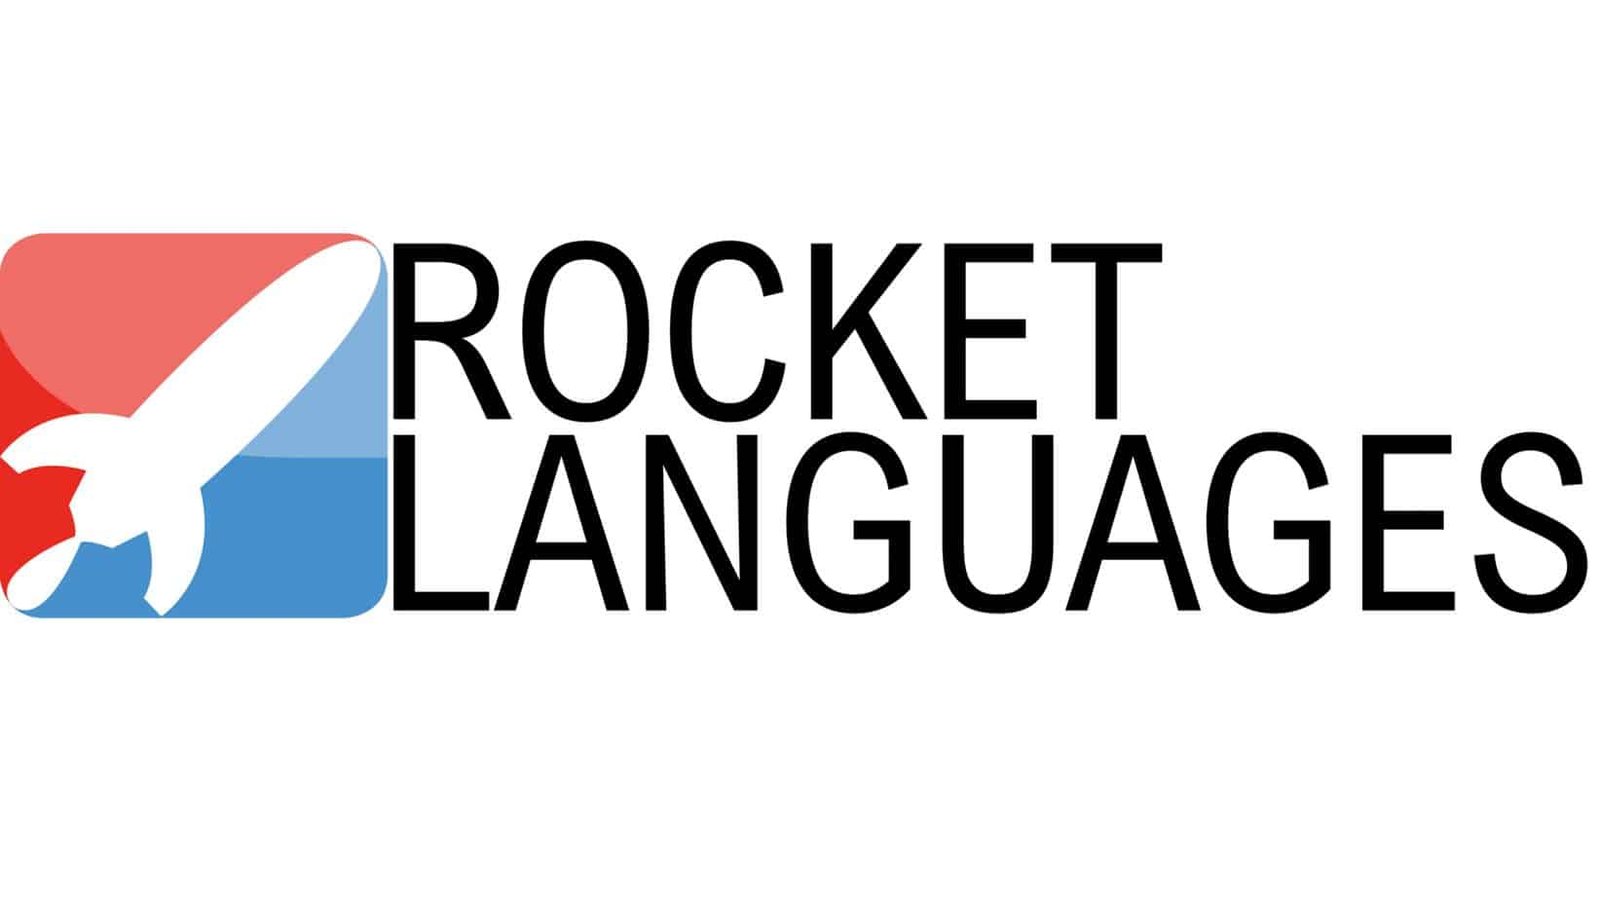 Rocket Languages: Your top learning choice